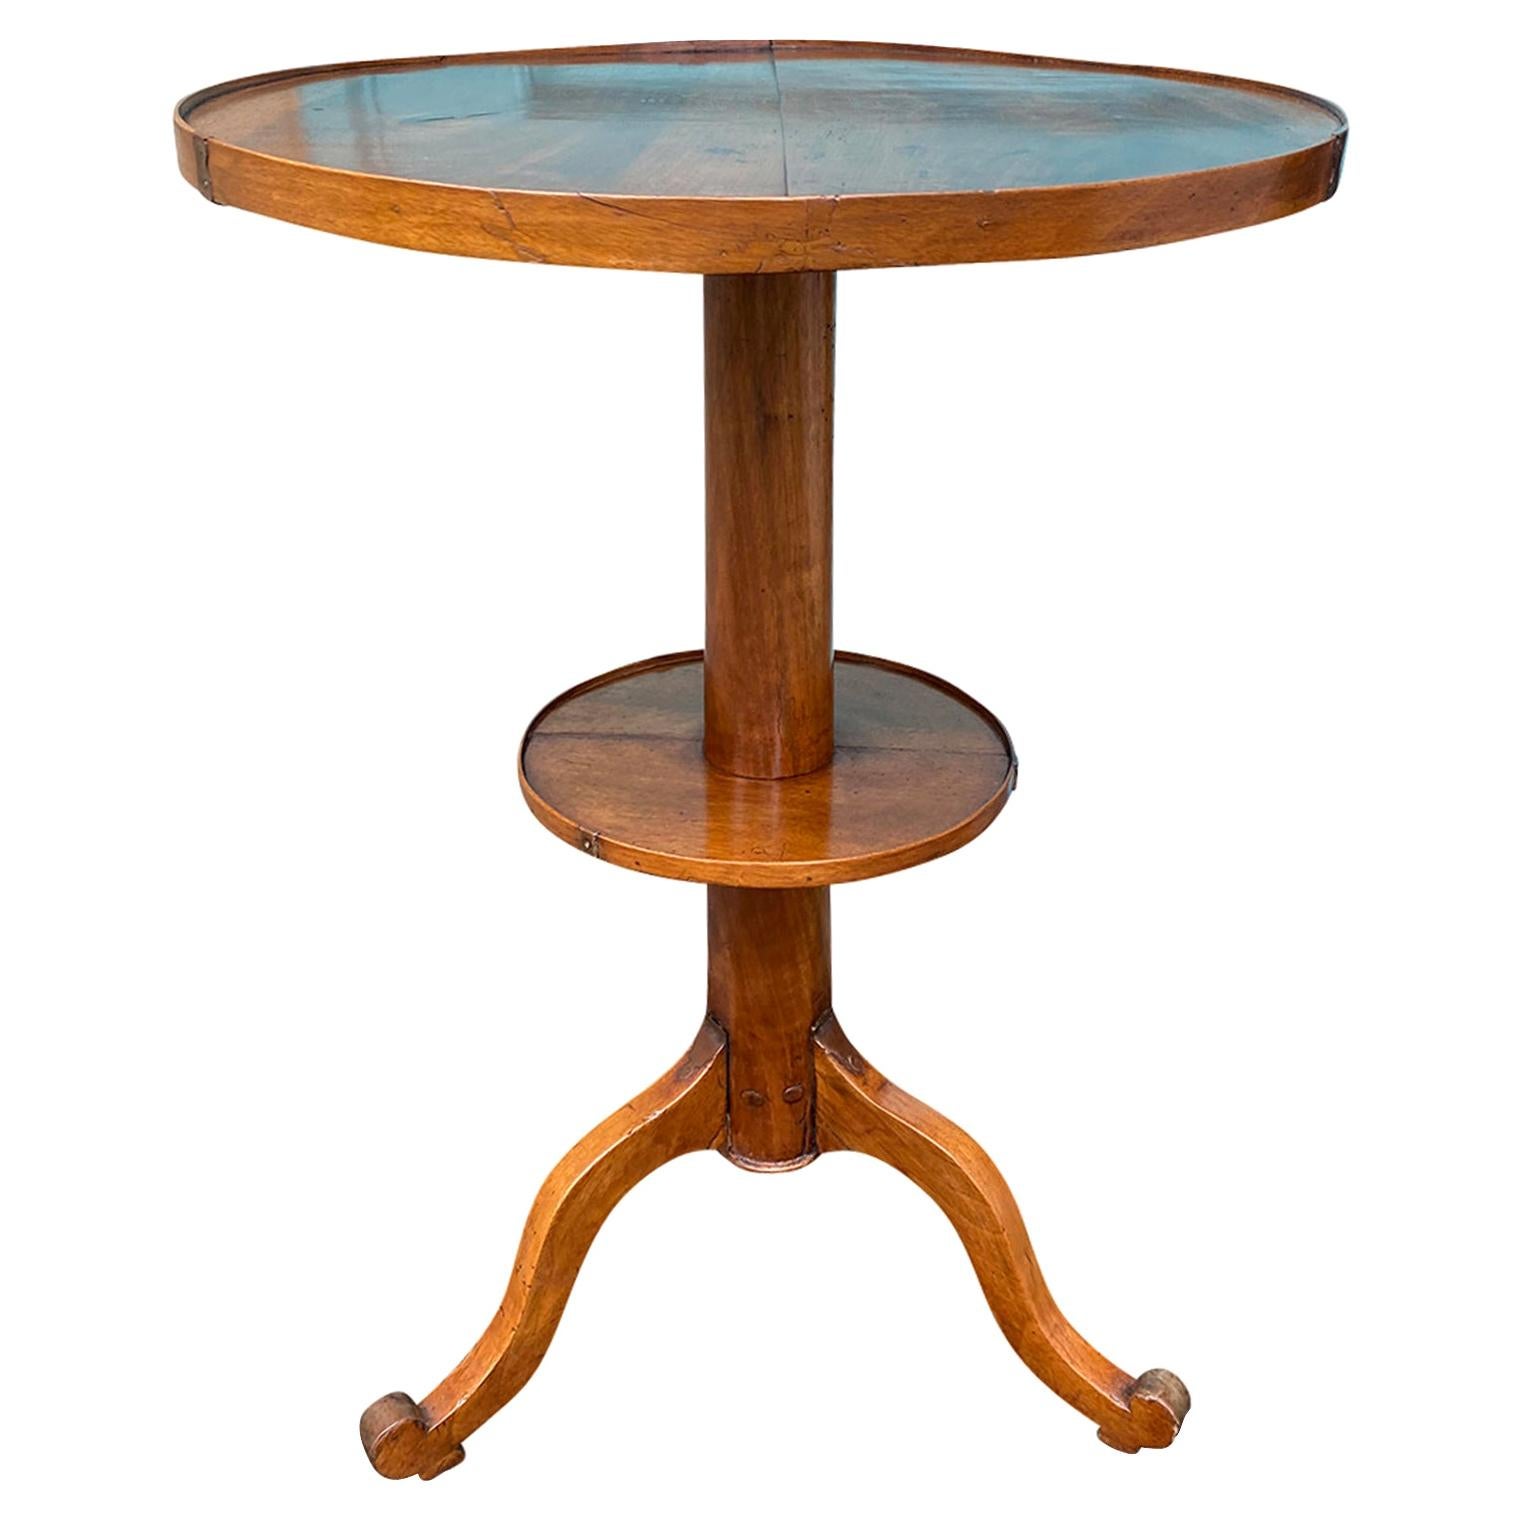 19th-20th Century French Walnut Round Side Tripod Table For Sale